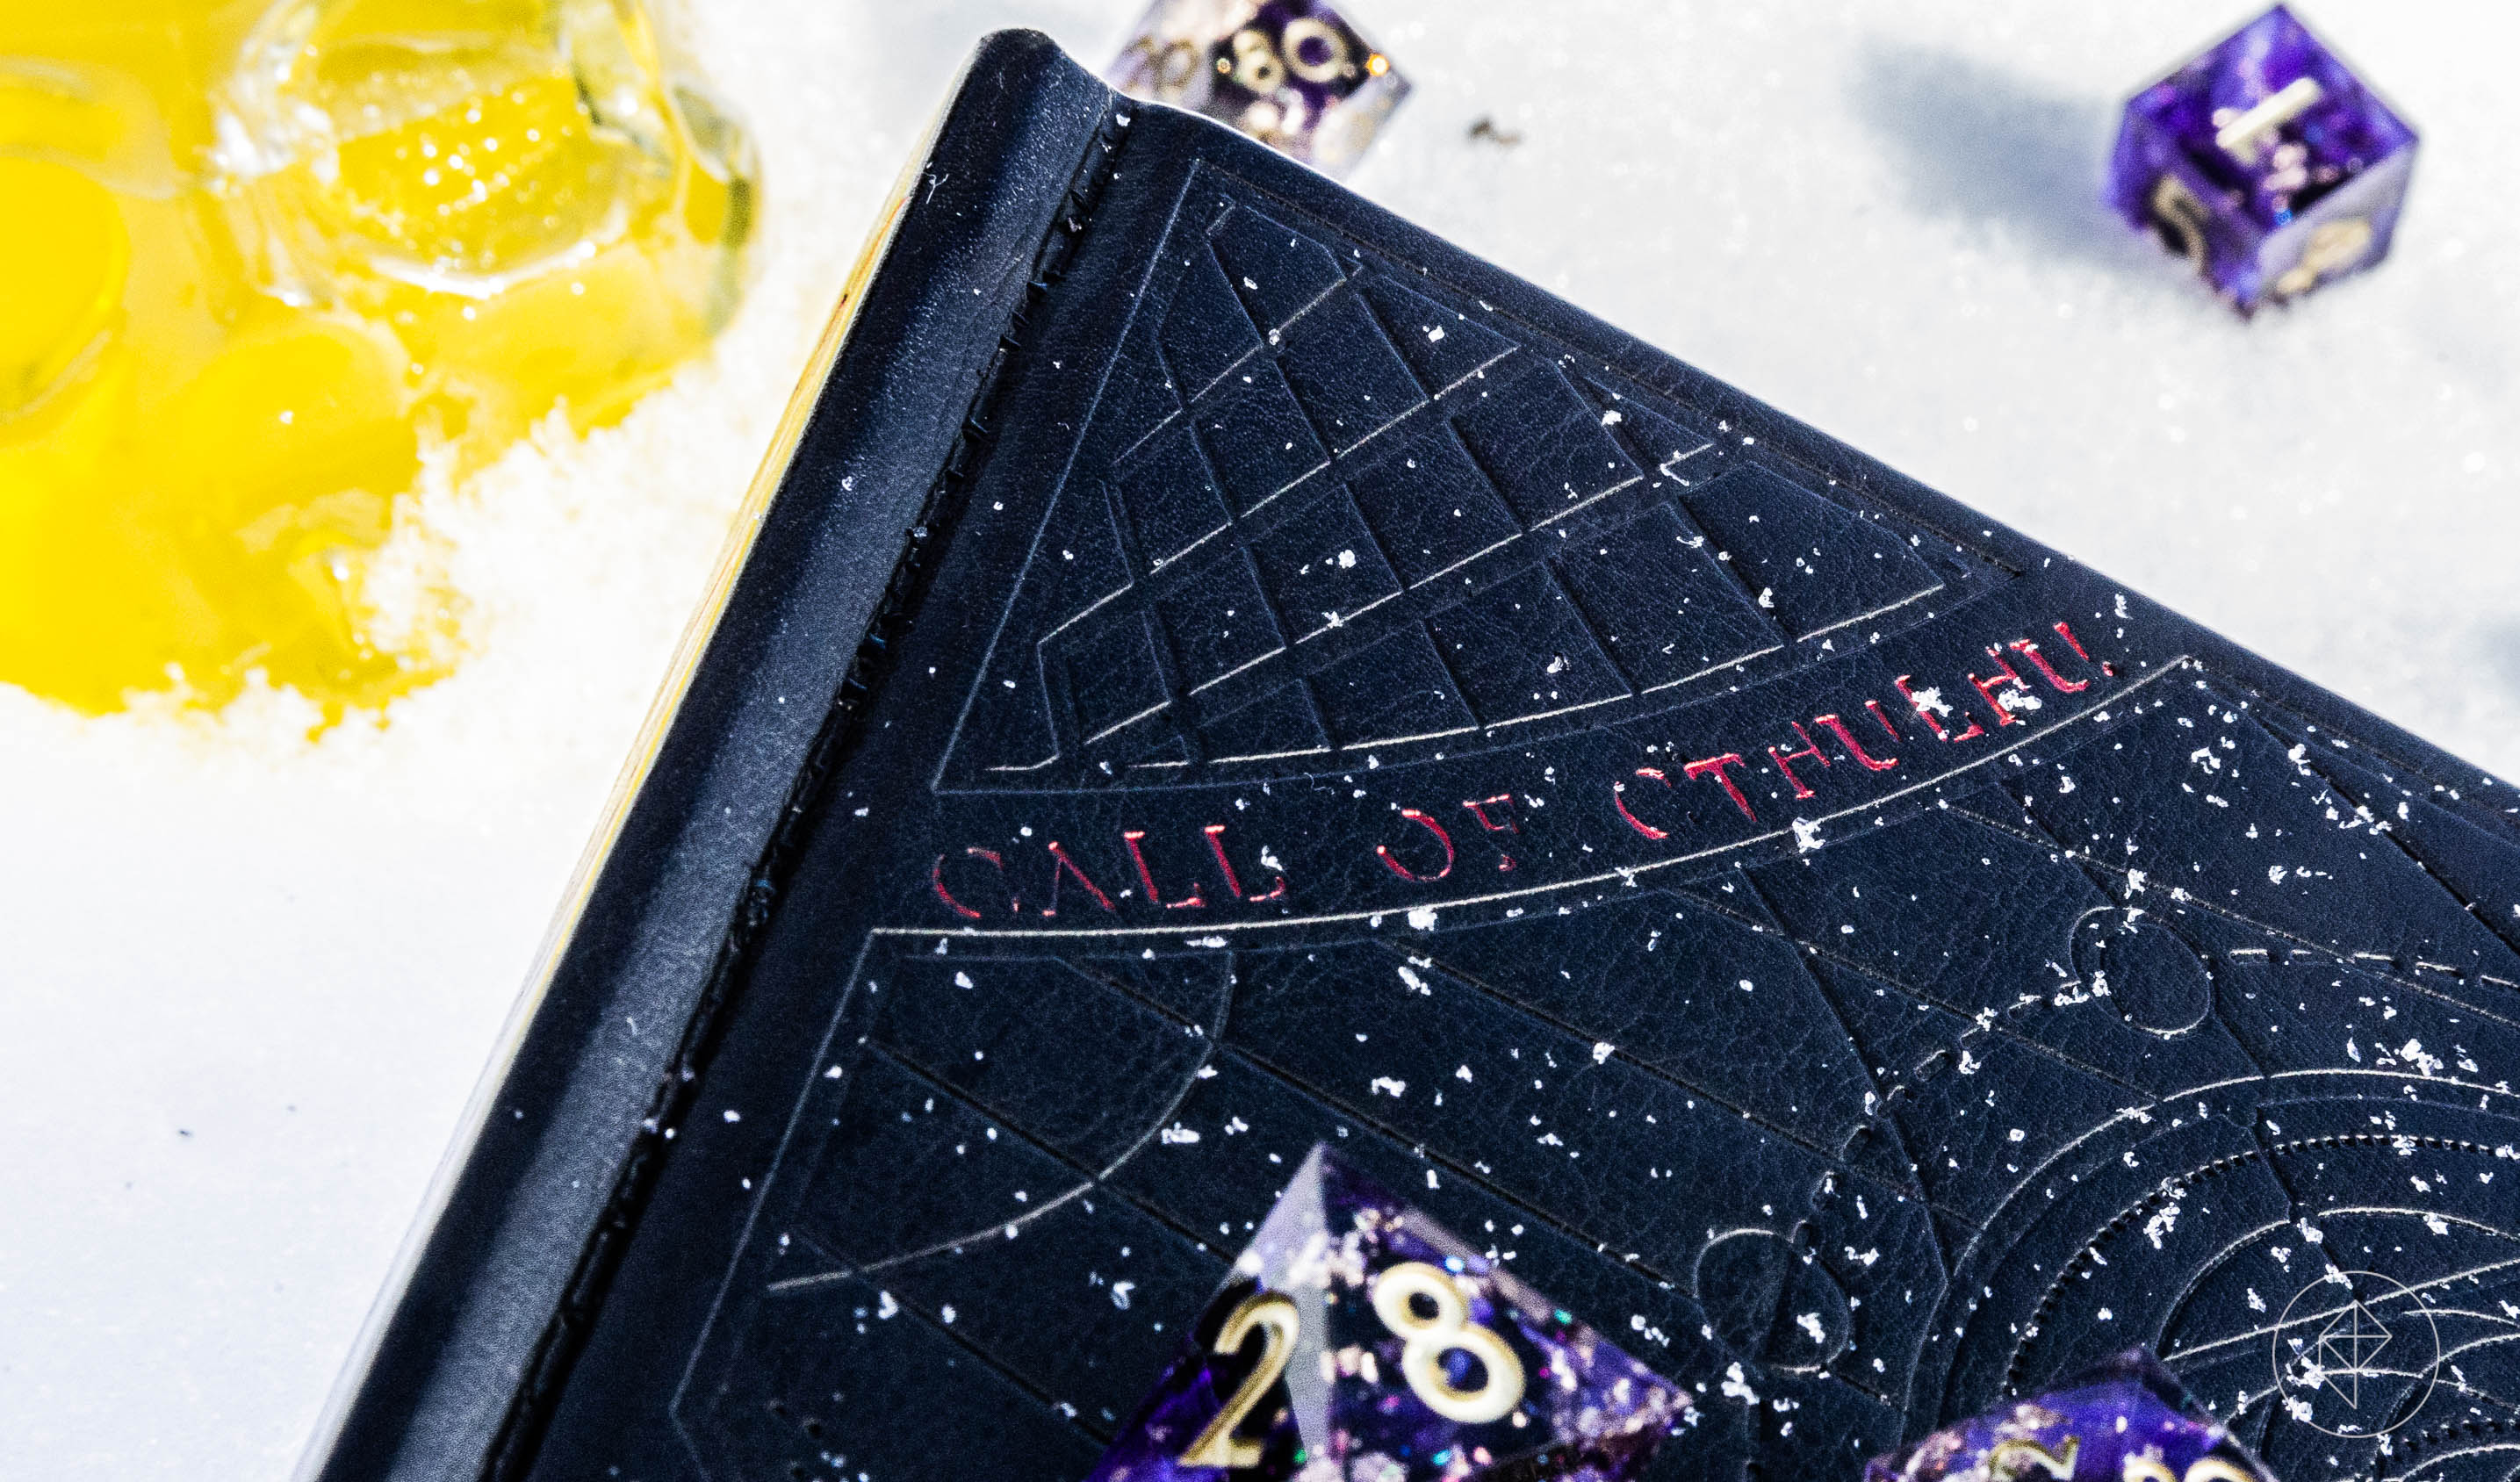 A leather-bound book imprited with arcane sigils sits half buried in the snow. It reads “Call of Cthulhu” in a curving font. A crystal skull and purple dice frame the image.